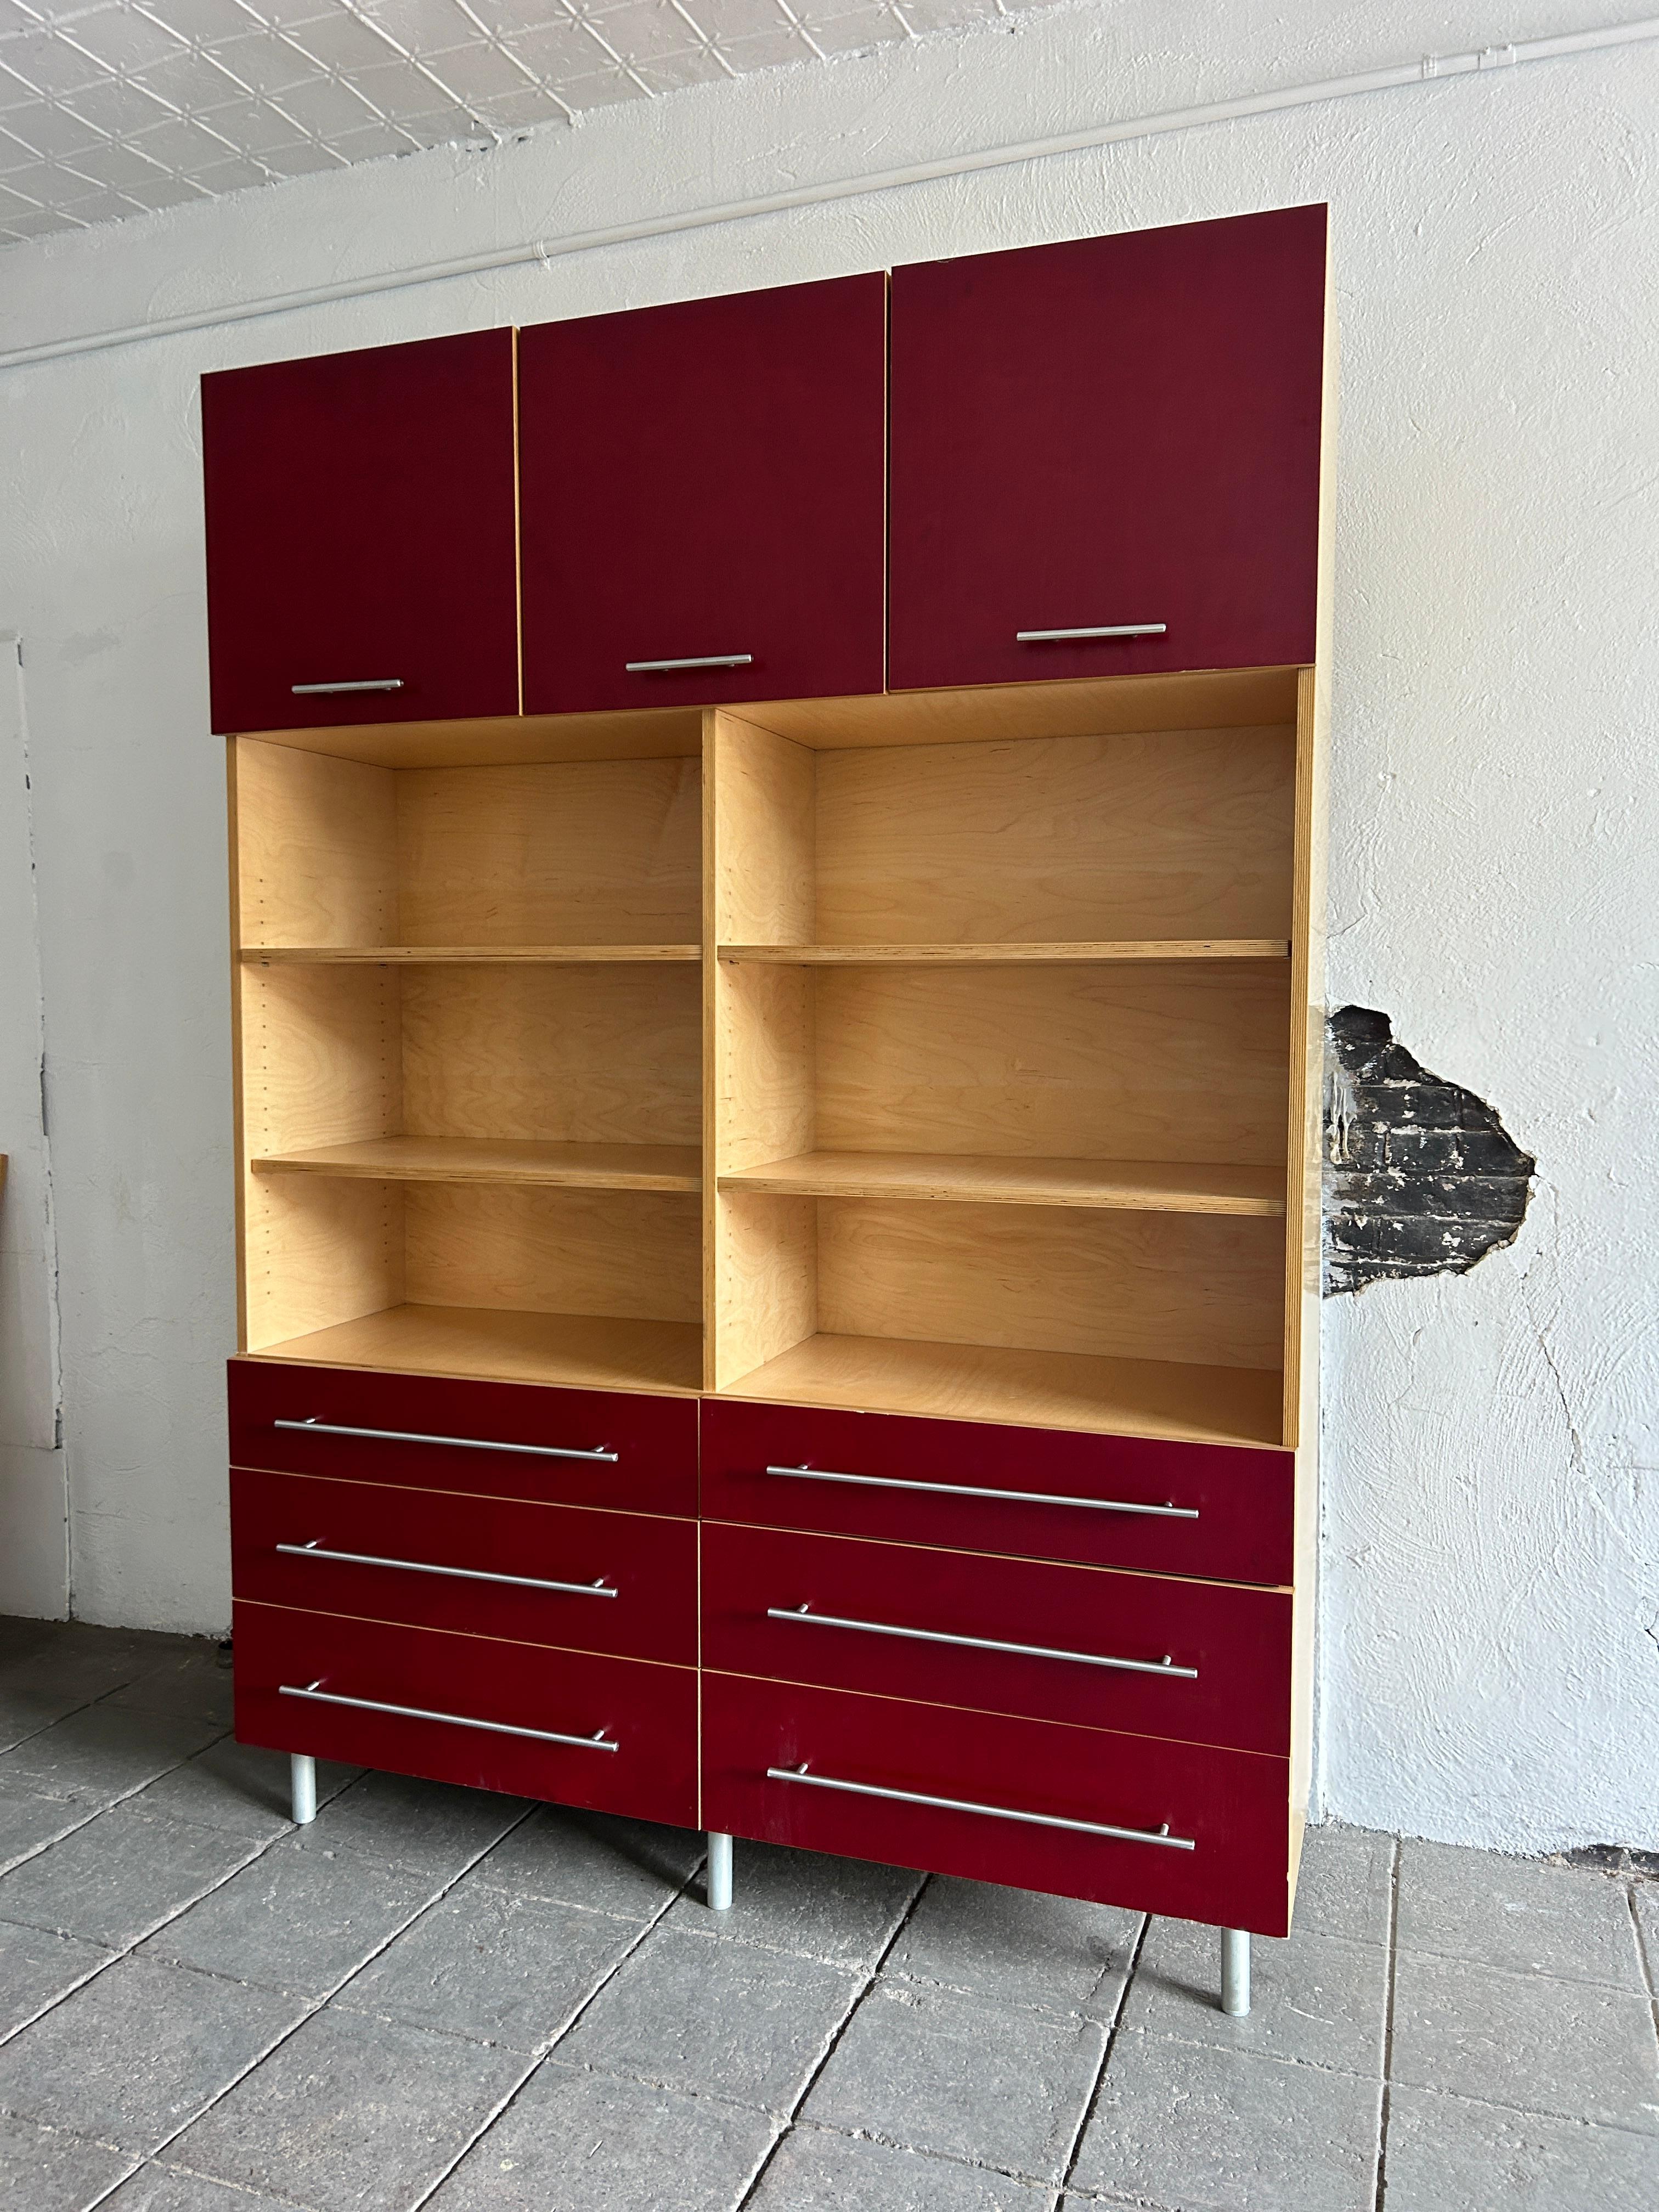 Modern custom high end plywood wall unit dresser credenza upper cabinets shelves. The entire unit is custom made with Multilayer Birch plywood and the lower 6 drawers and the 3 cabinets have a dark red facade that is multilayer plywood. The whole